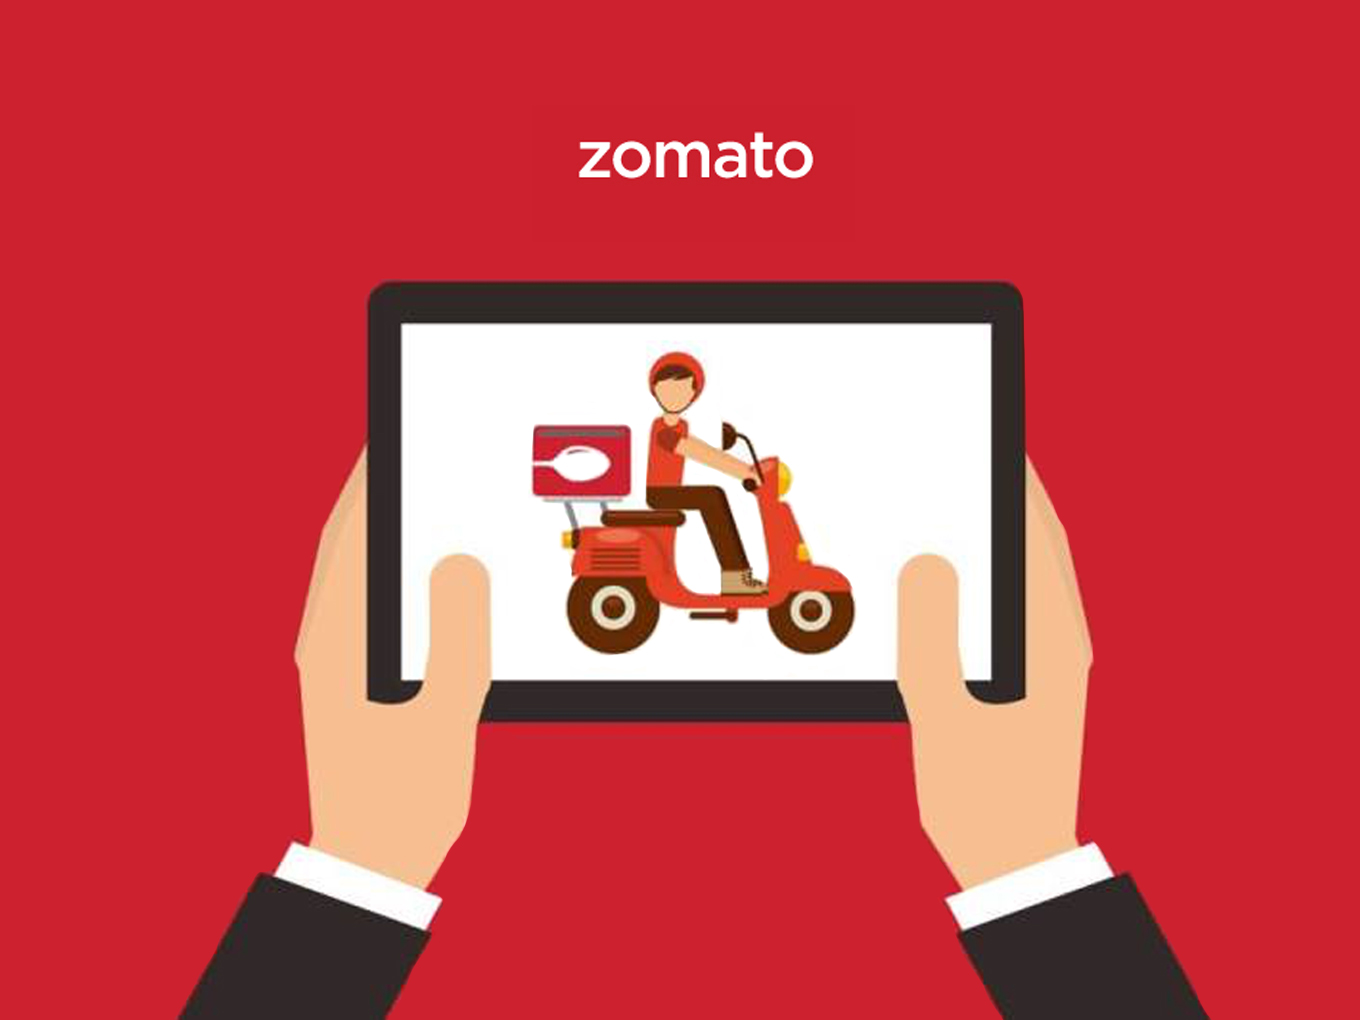 What Is Zomato’s Business Model?